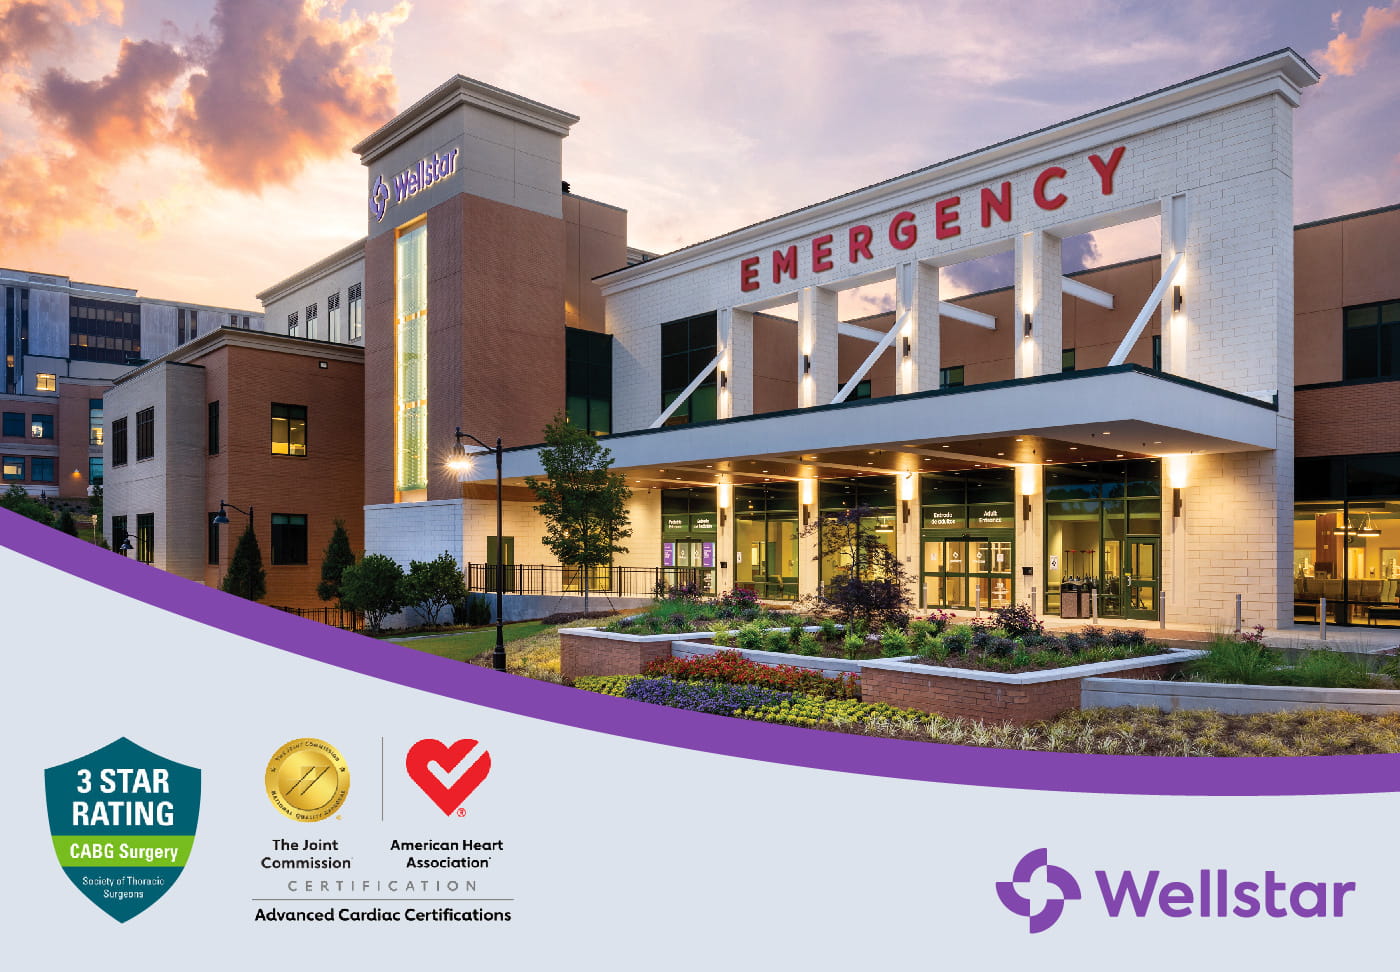 A photo of Wellstar Kennestone Regional Medical Center, the 3 Star Rating, Joint Commission C4 certification and Wellstar logo